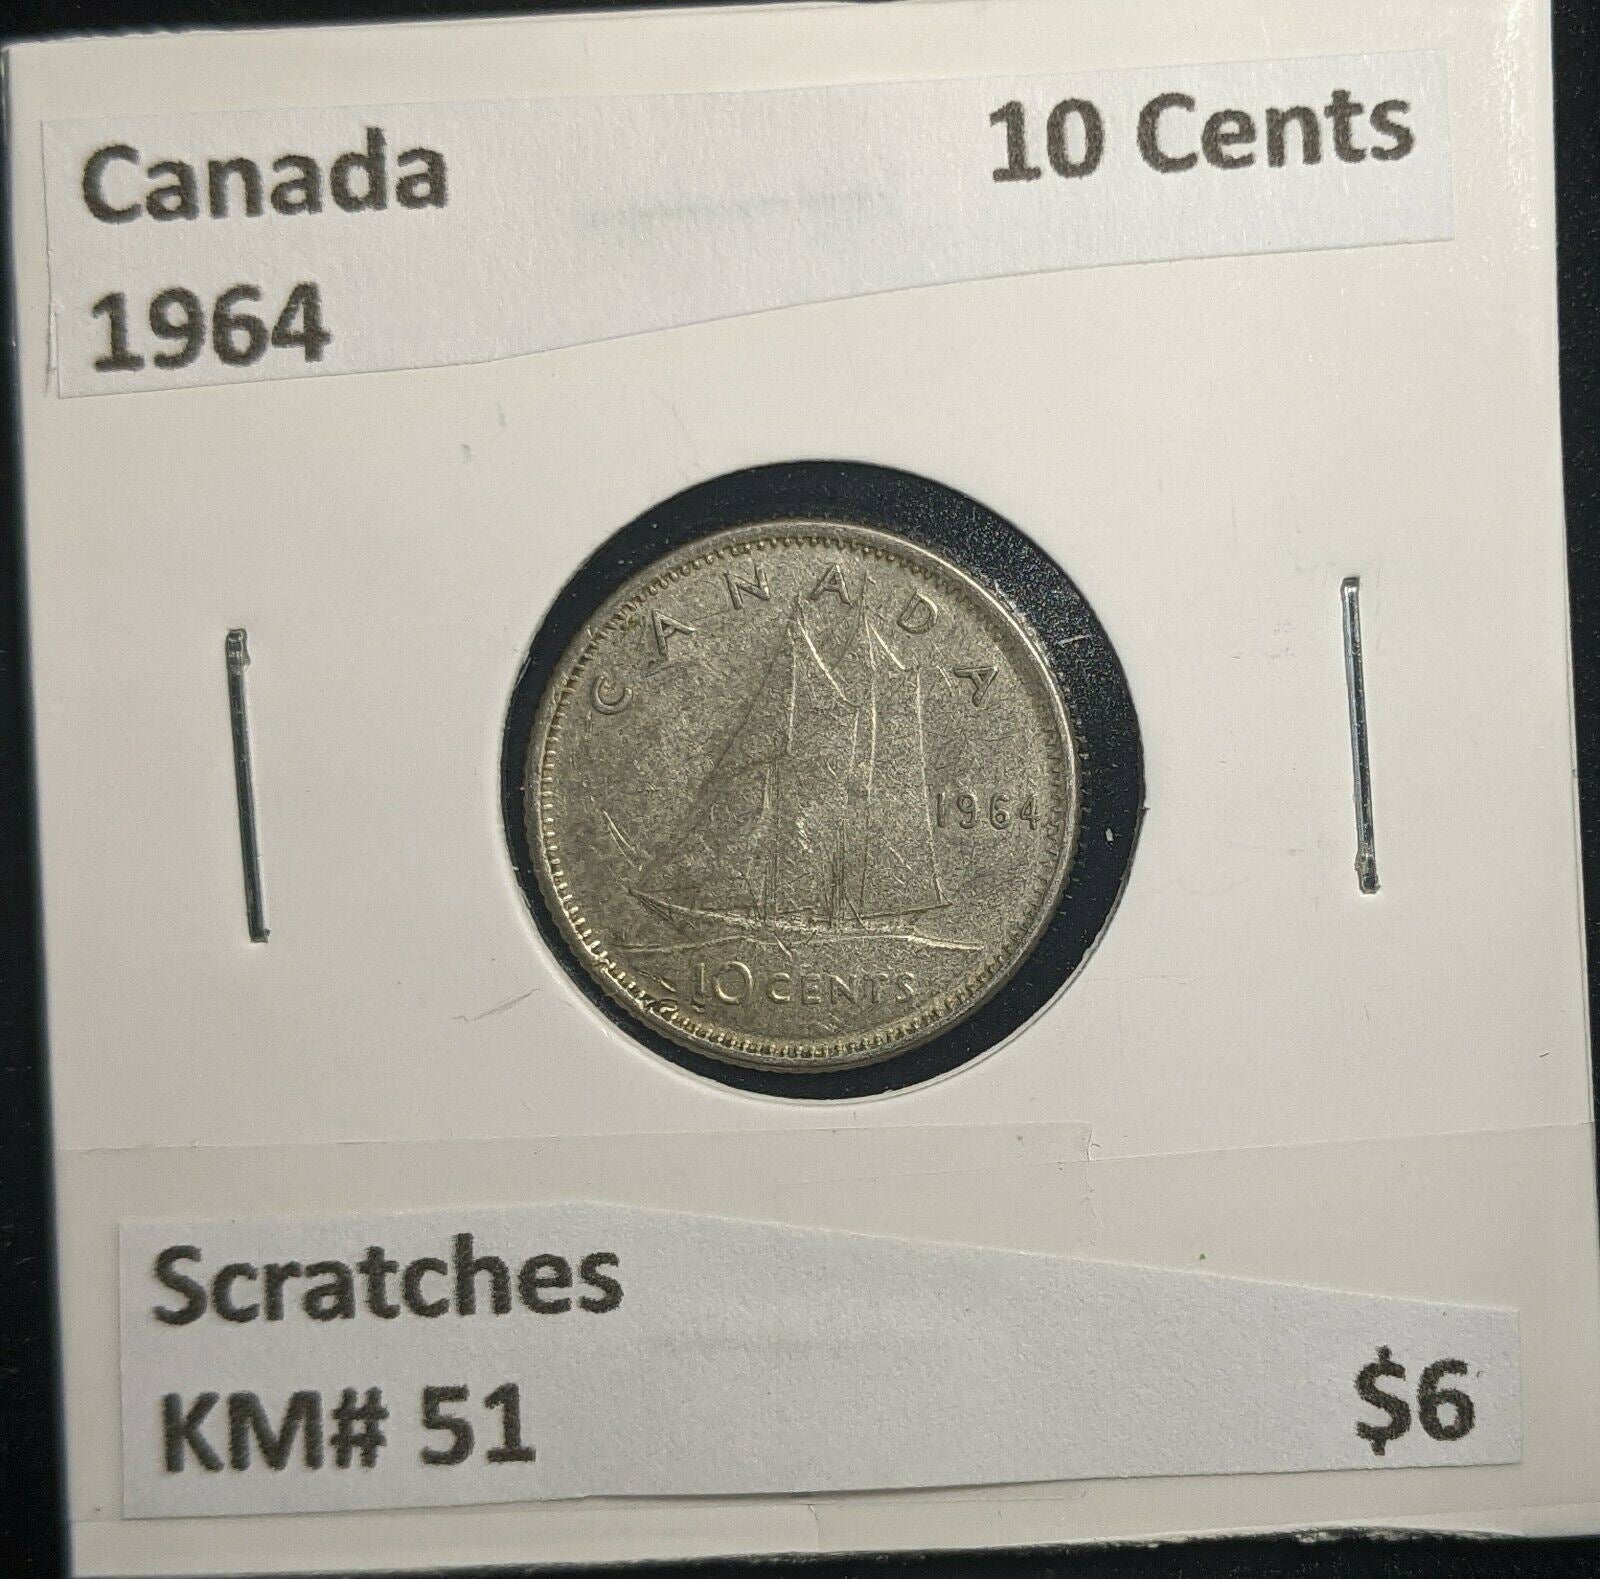 Canada 1964 10 Cents KM# 51 Scratches #127